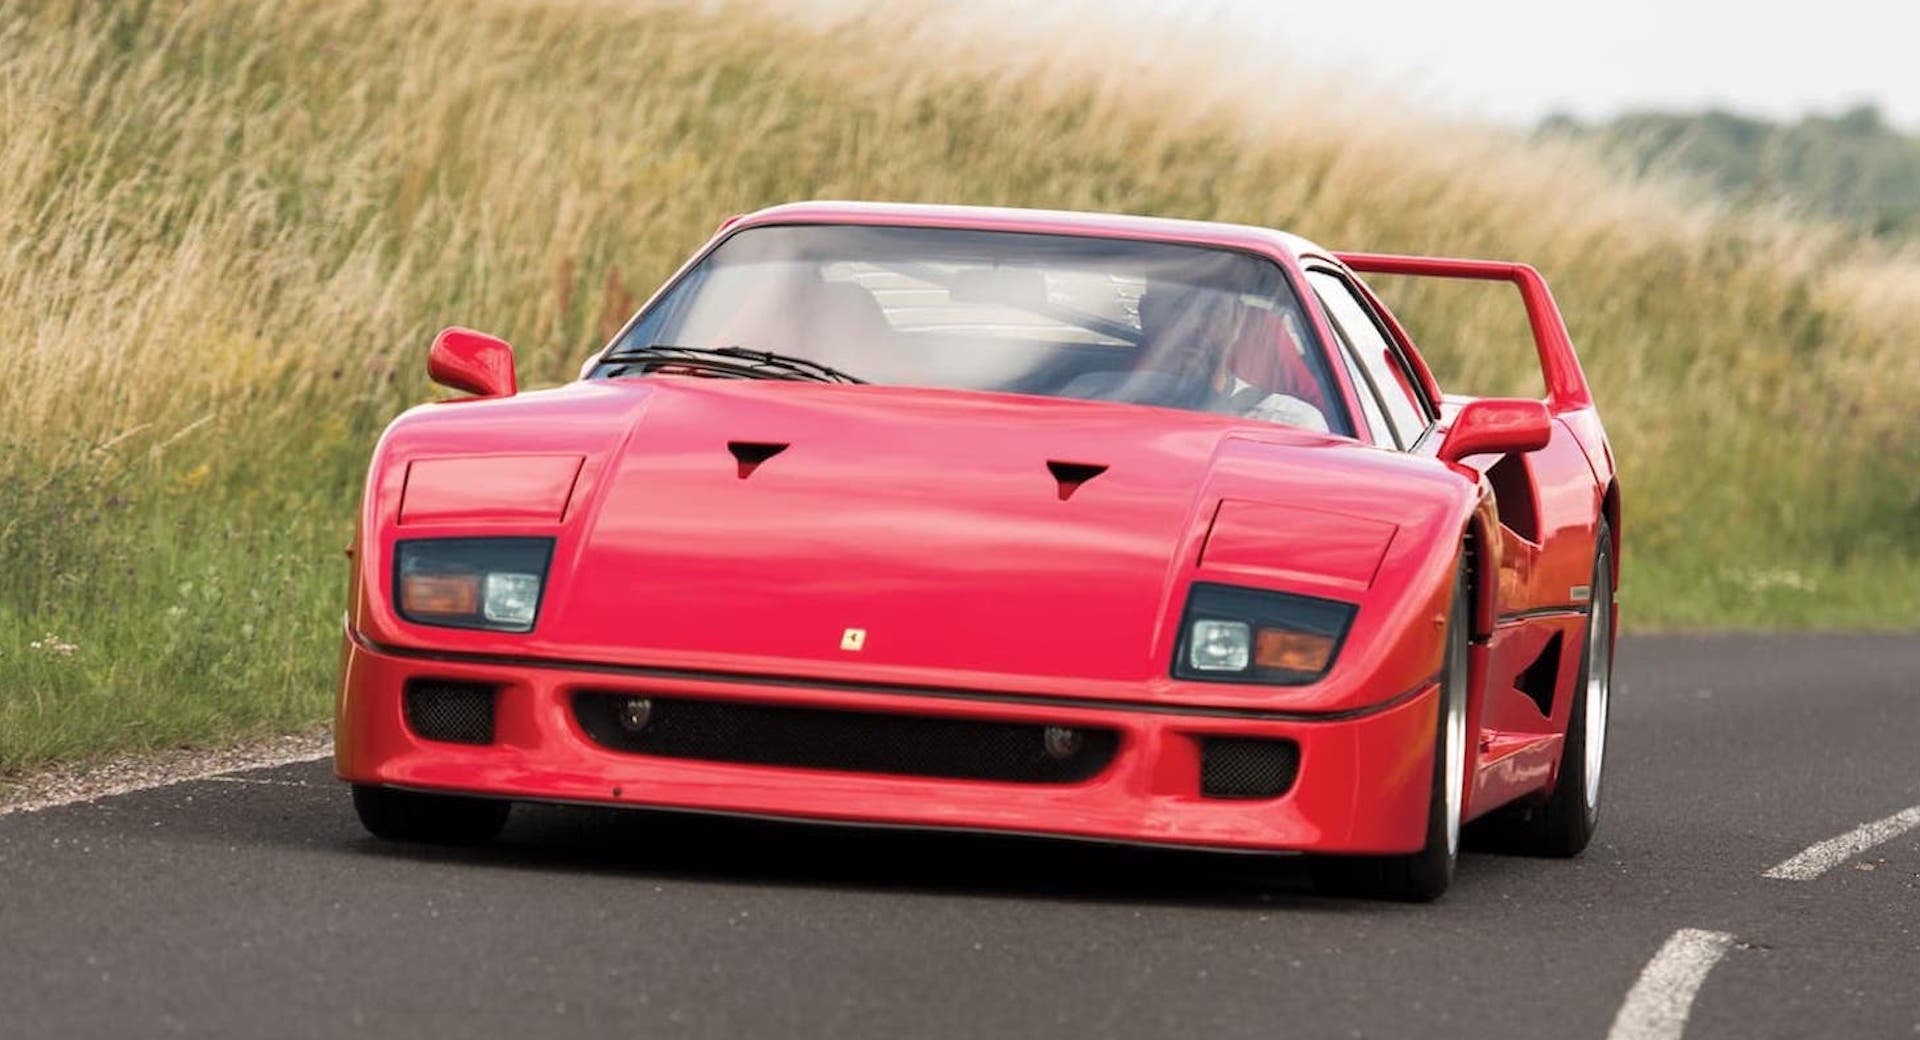 Forslag Tomhed web The Best Cars I've Driven #1: Ferrari F40 | Carscoops